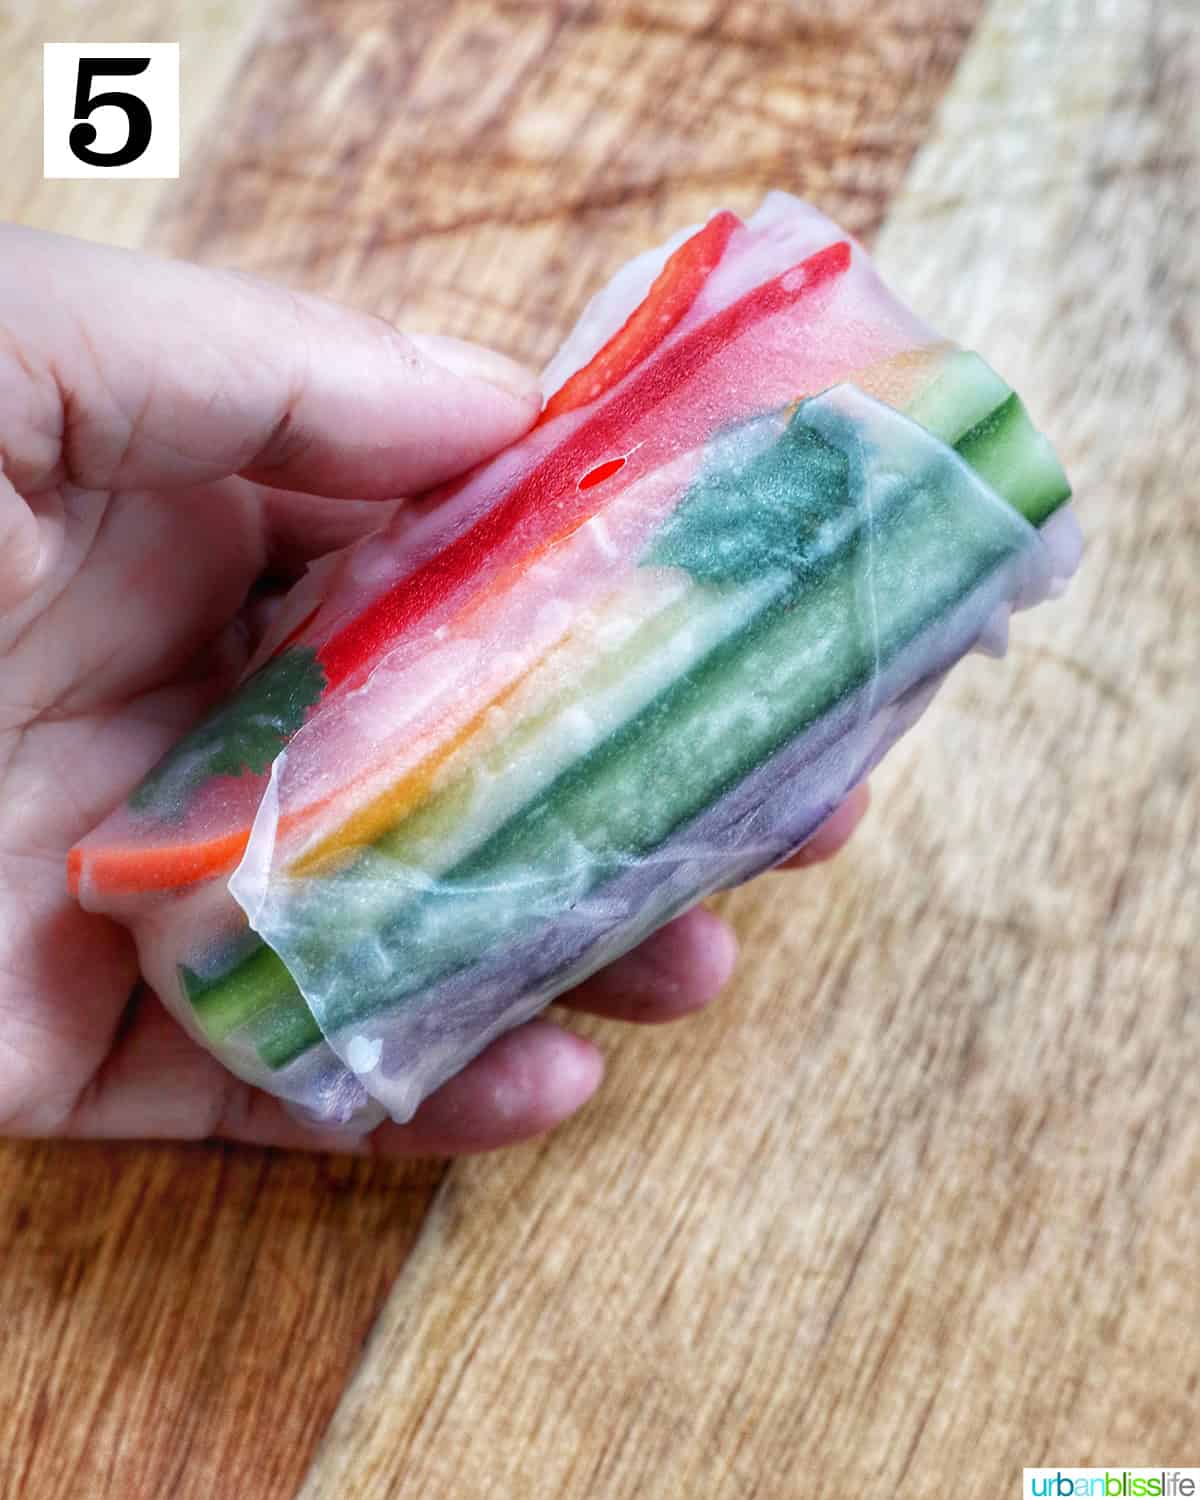 hand holding a rolled up vegan summer roll filled with sliced colorful vegetables above a wooden cutting board.